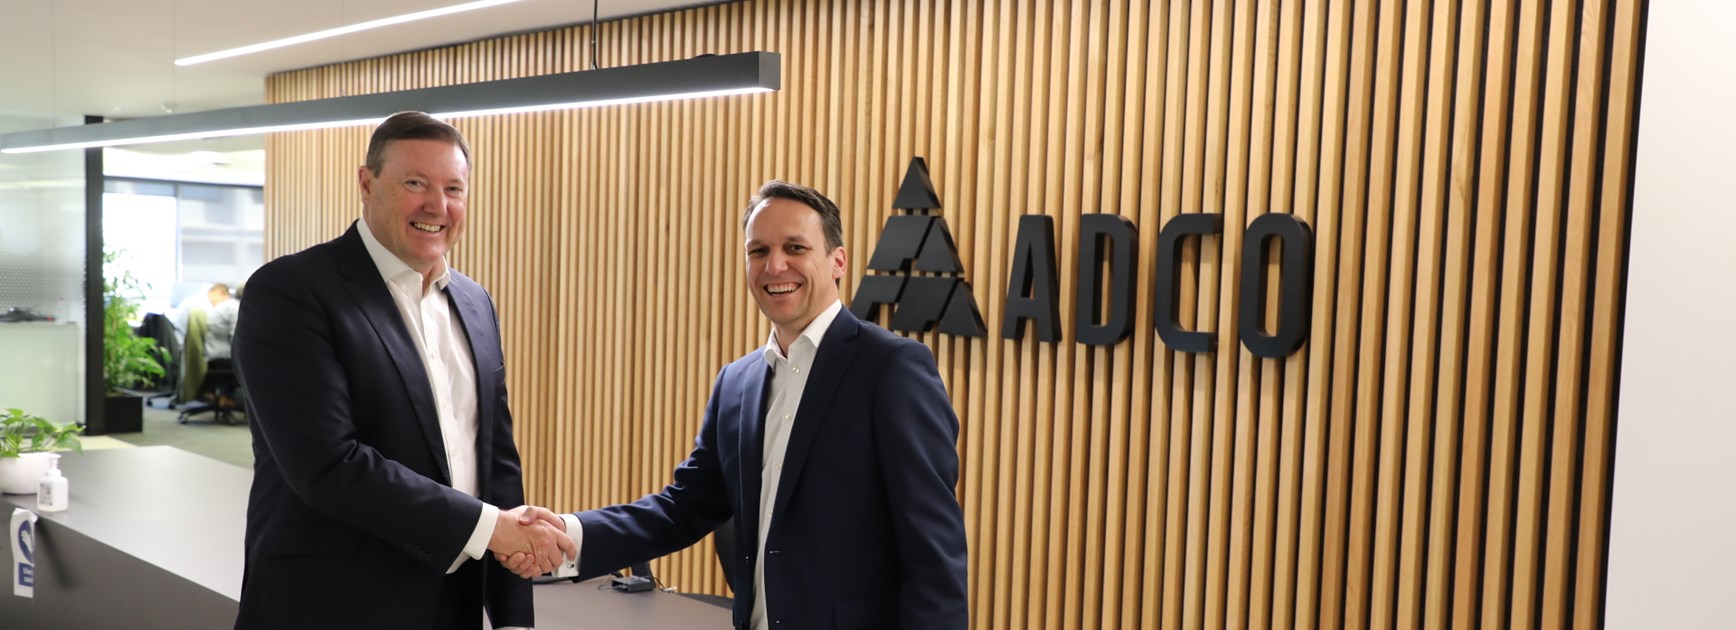 Sea Eagles CEO Stephen Humphreys (left) with ADCO CEO Neil Harding (right).